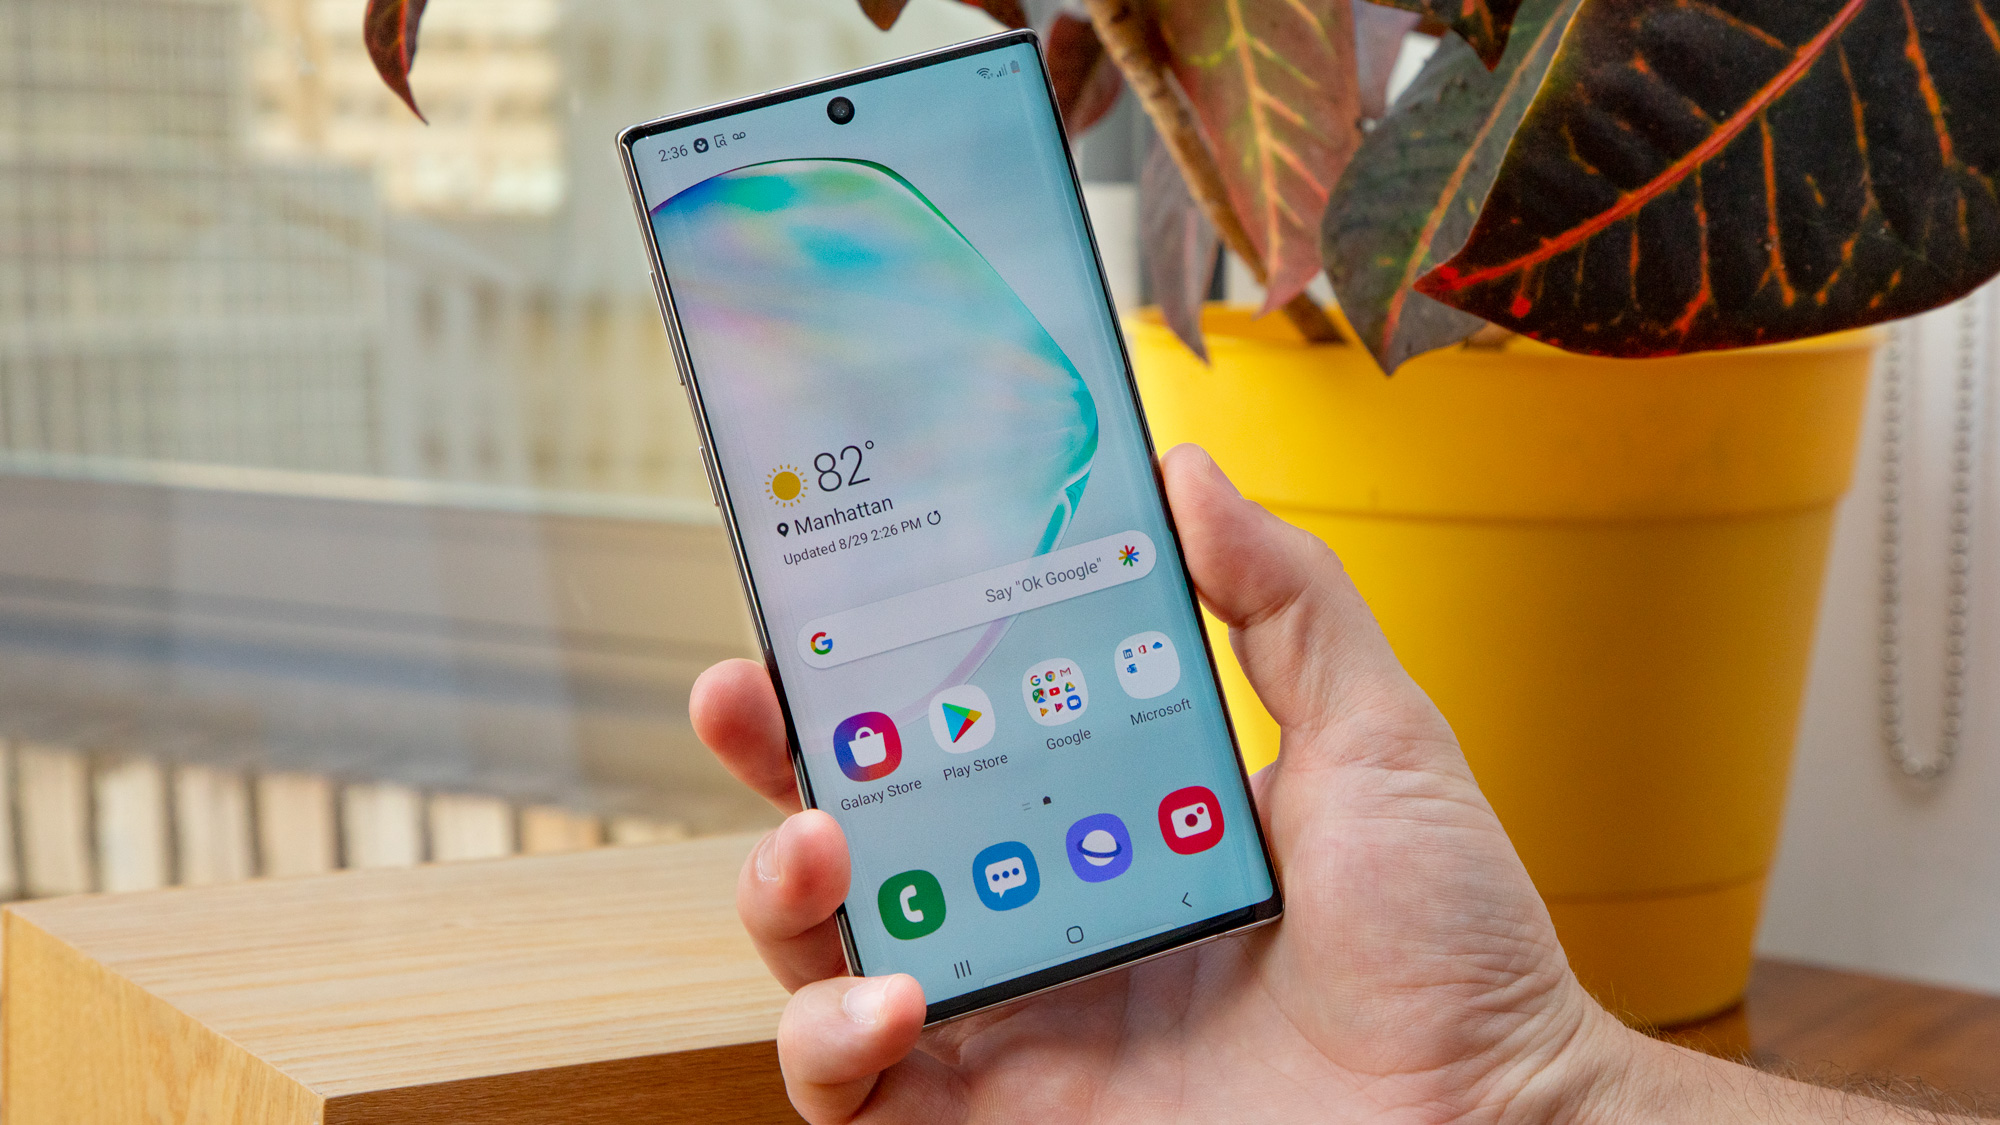 Samsung Galaxy Note 10 : Full specs and review